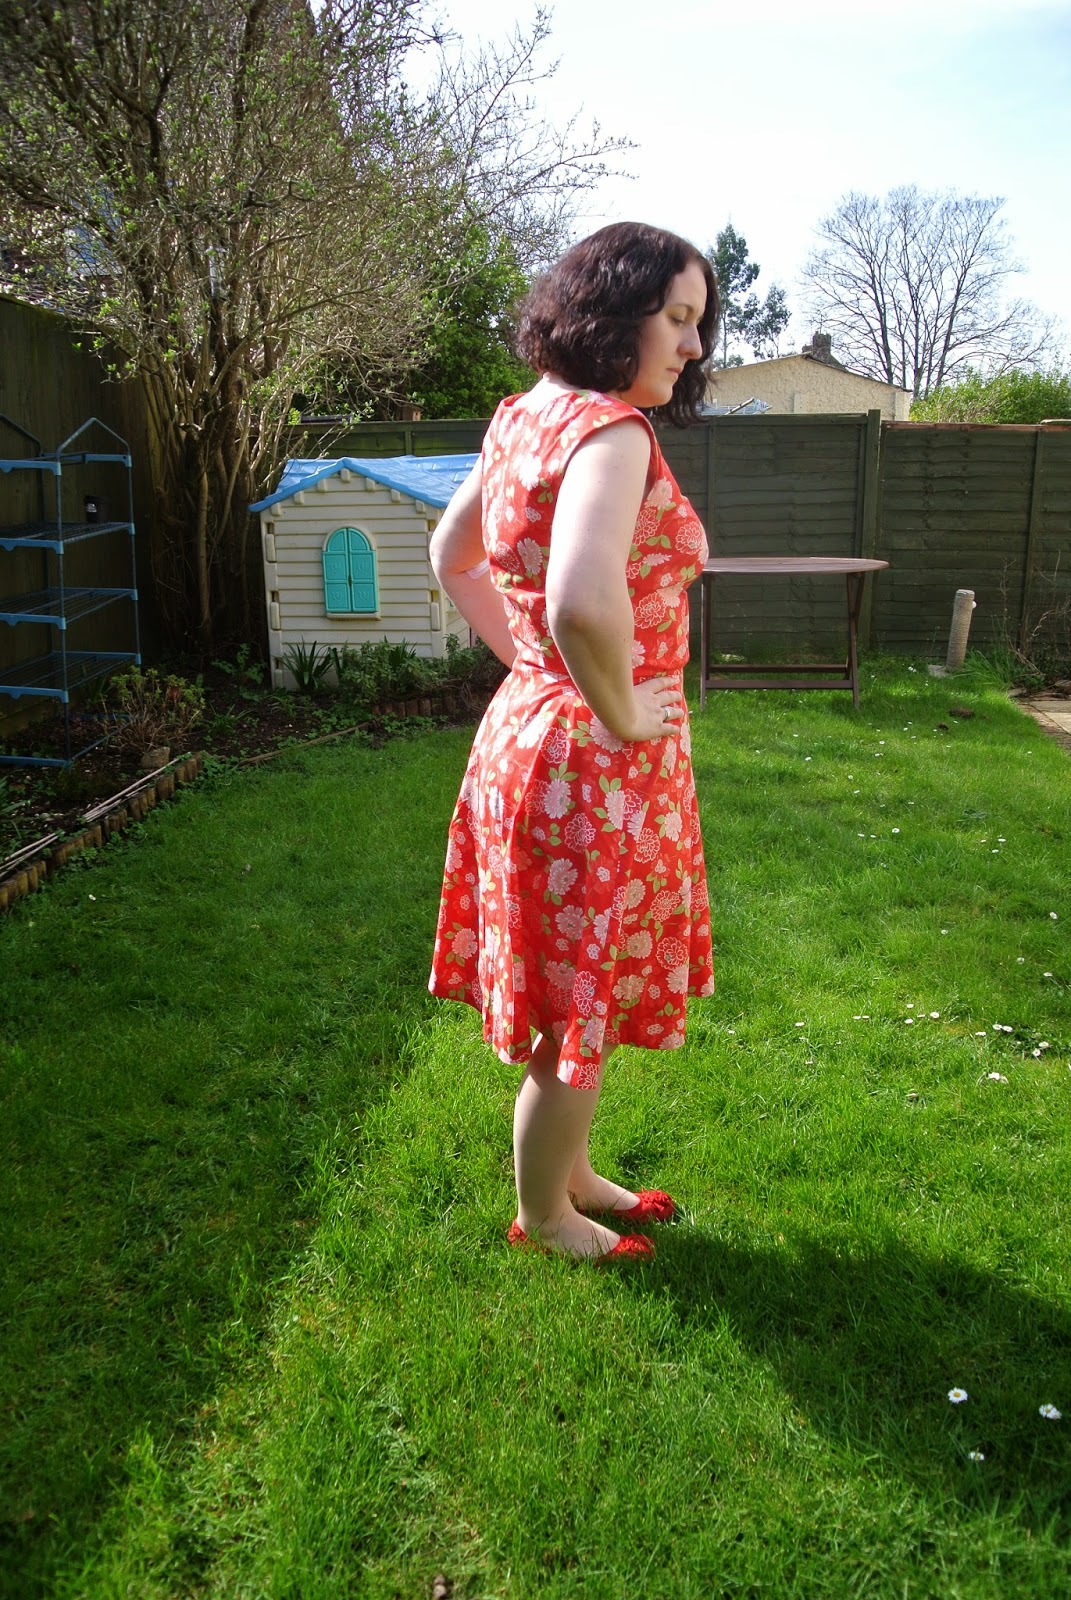 Sew little time: Mad men challenge - the Pensive Betty dress